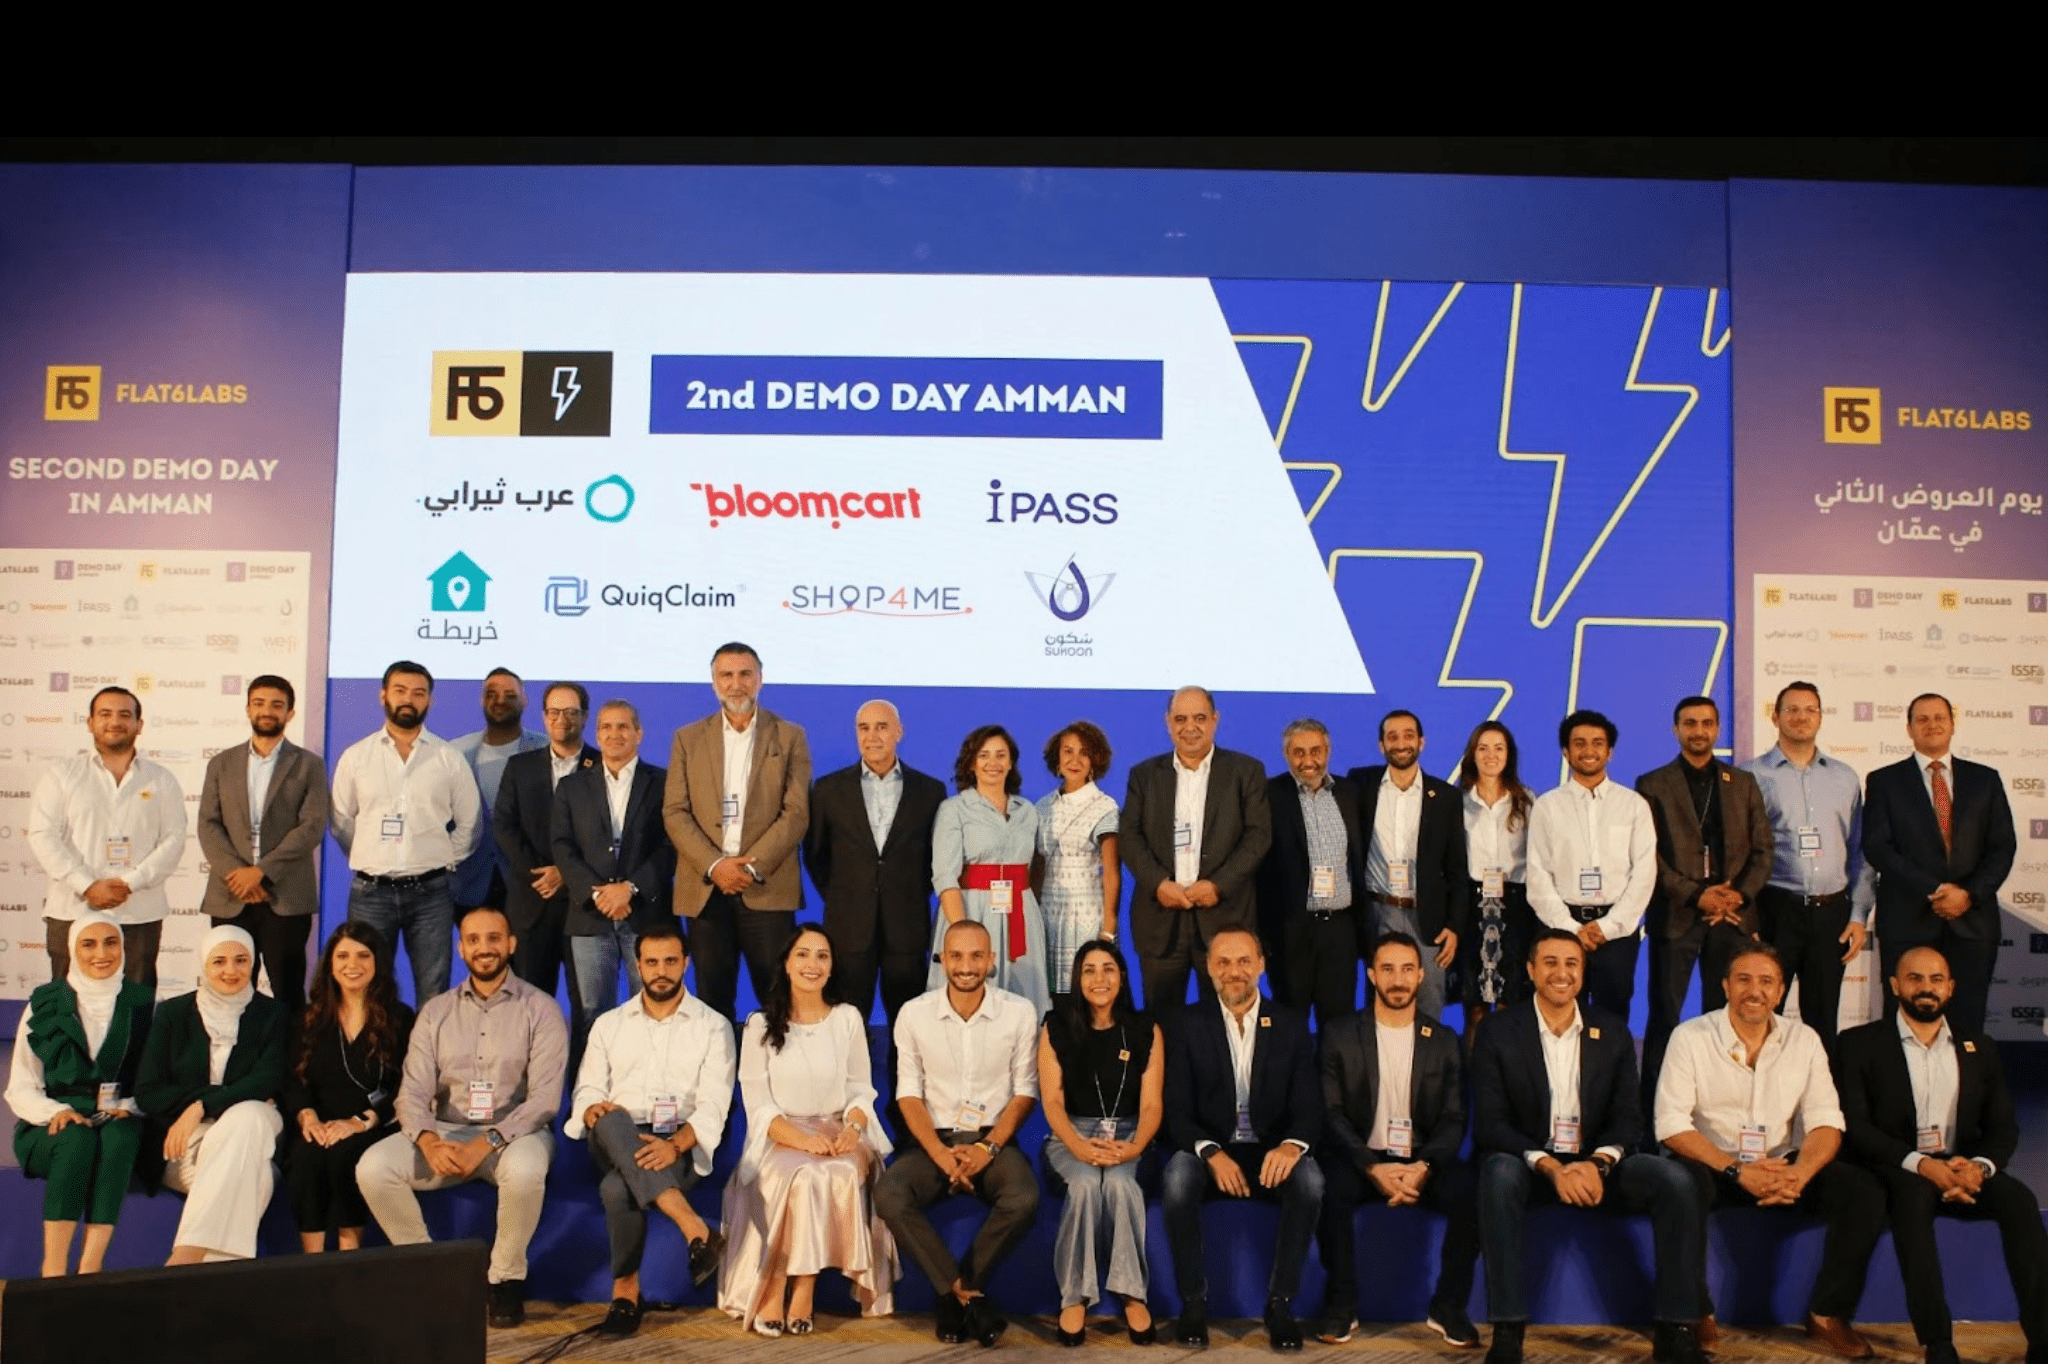 Flat6Labs Celebrates Second Demo Day in Amman